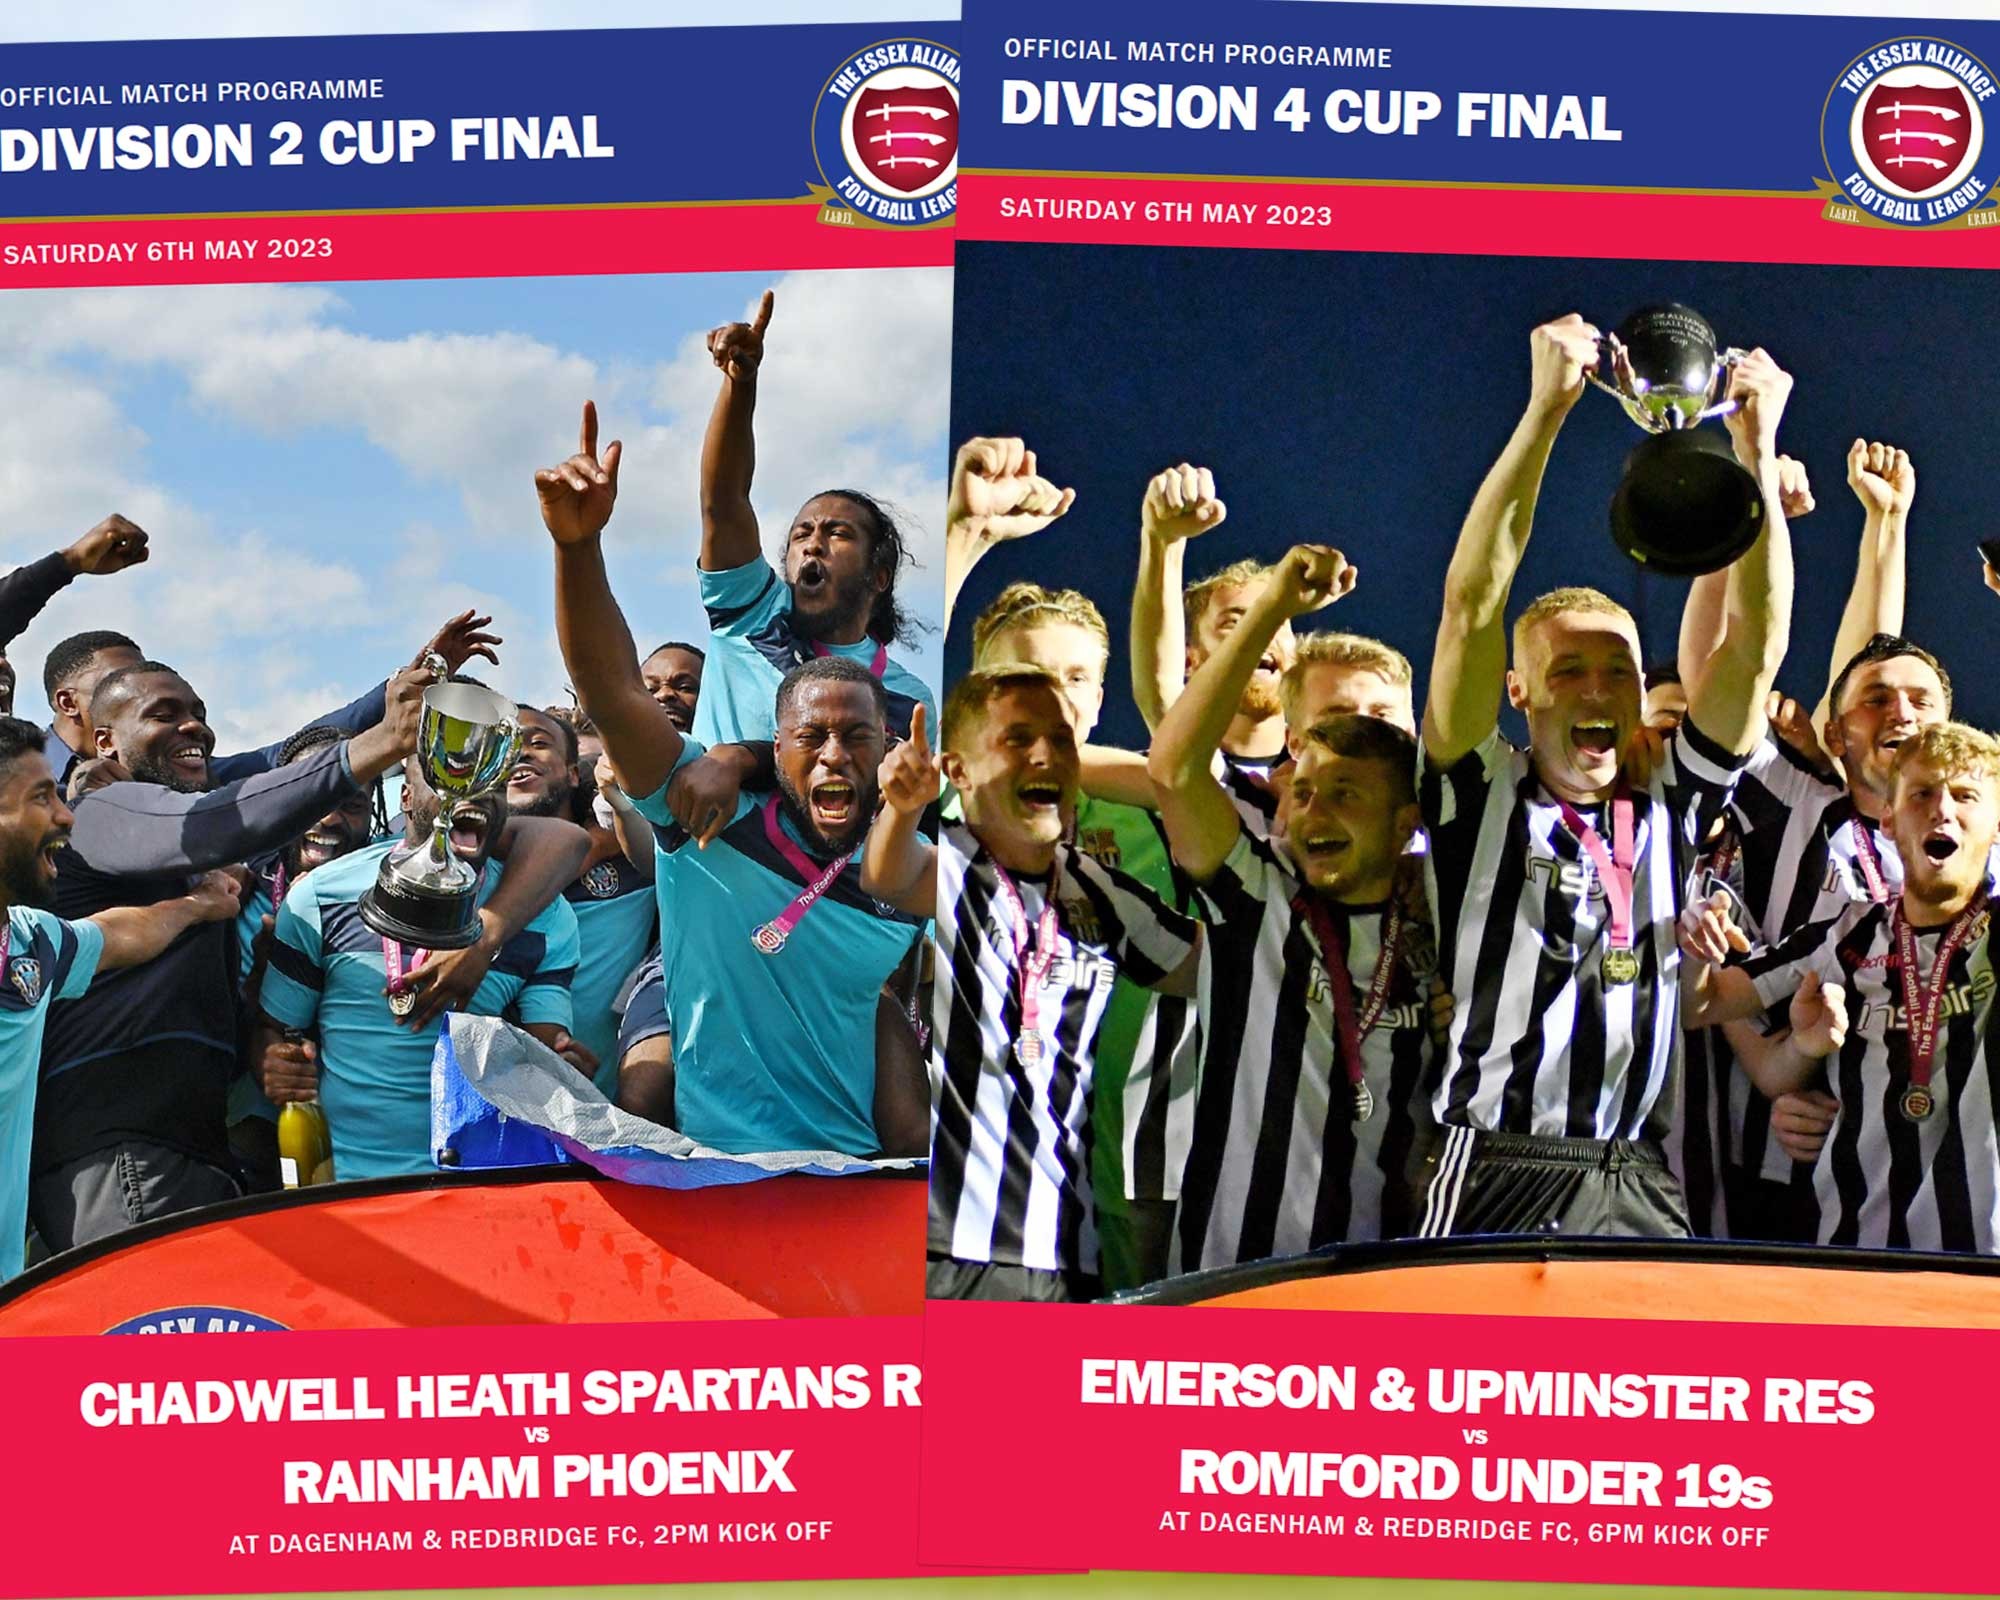 Cup finals season kicks off this weekend with Division 2 and 4 finals